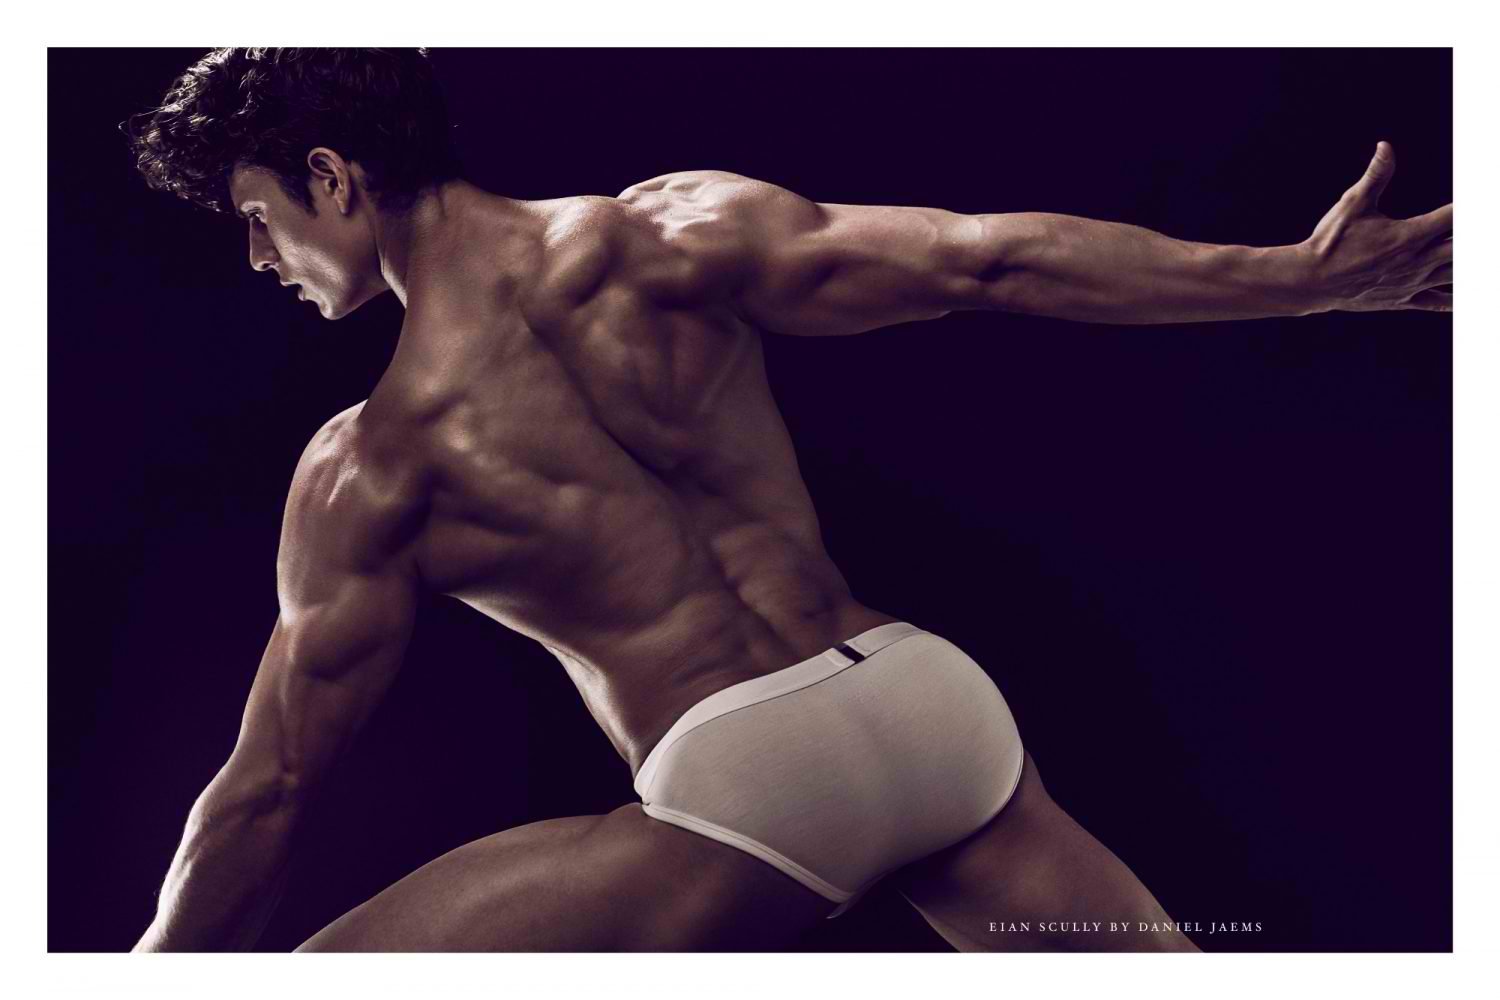 Eian-Scully-by-Daniel-Jaems-Obsession-No17-019-1500x1000